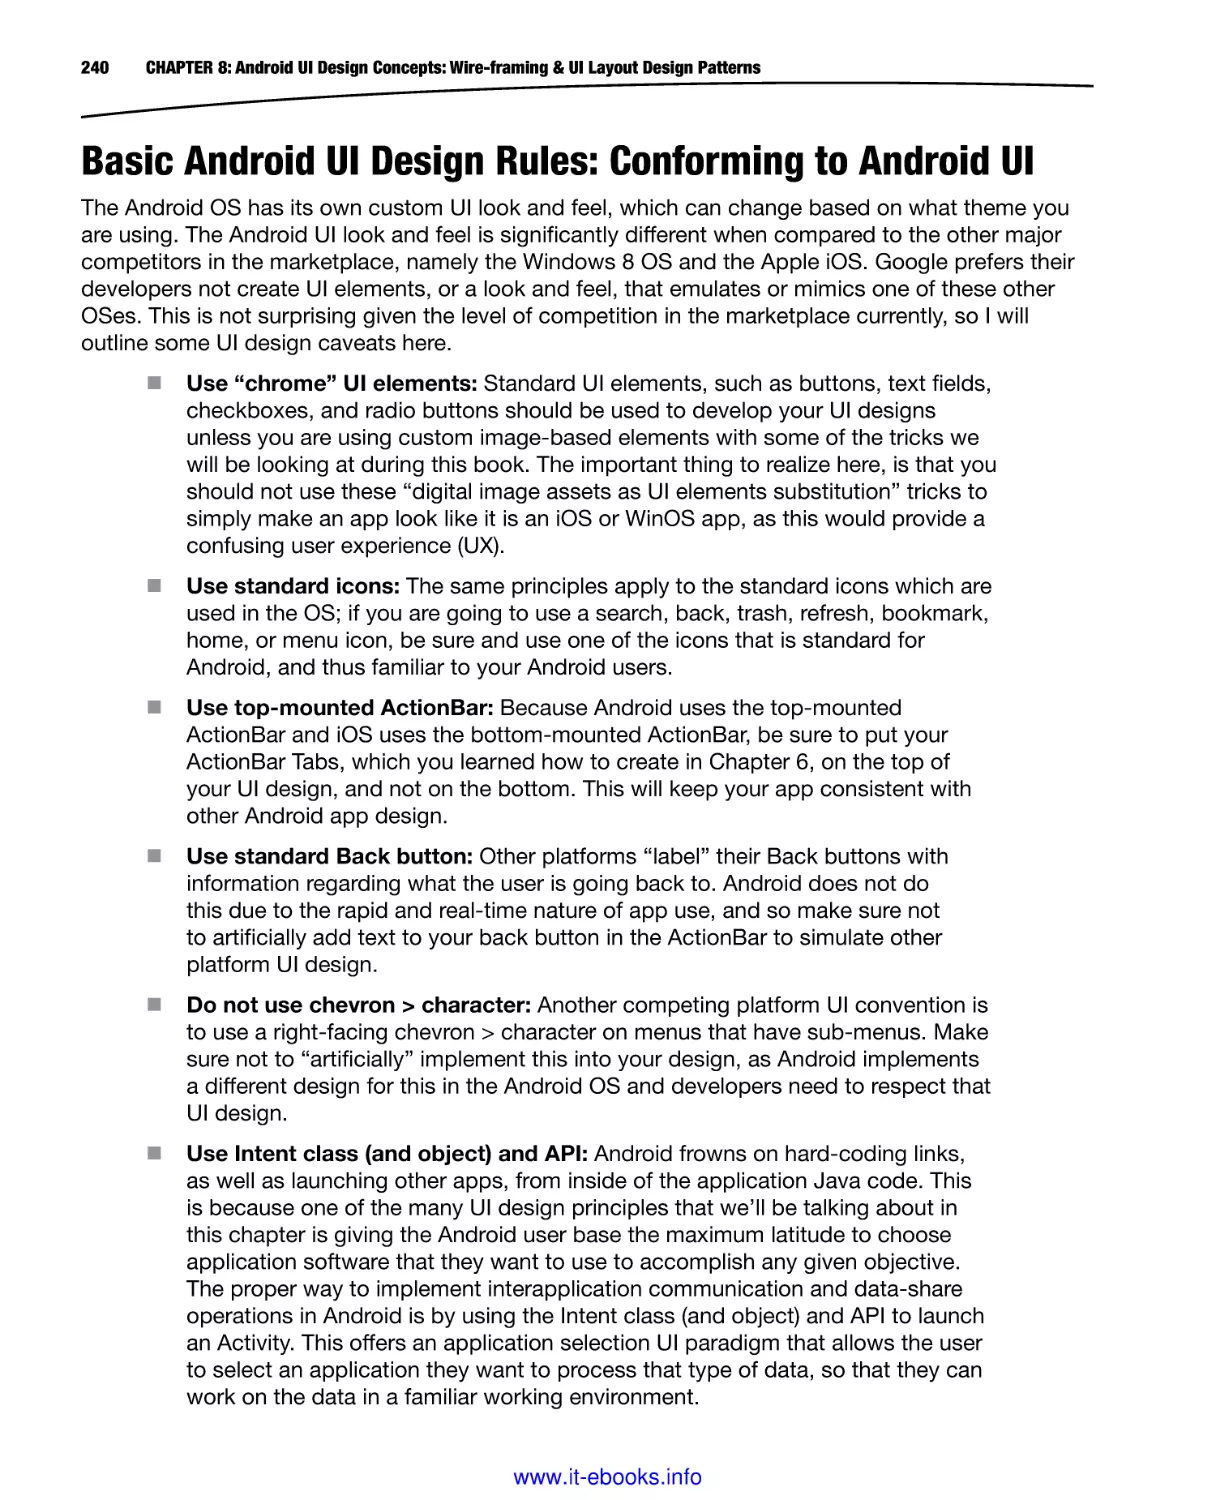 Basic Android UI Design Rules